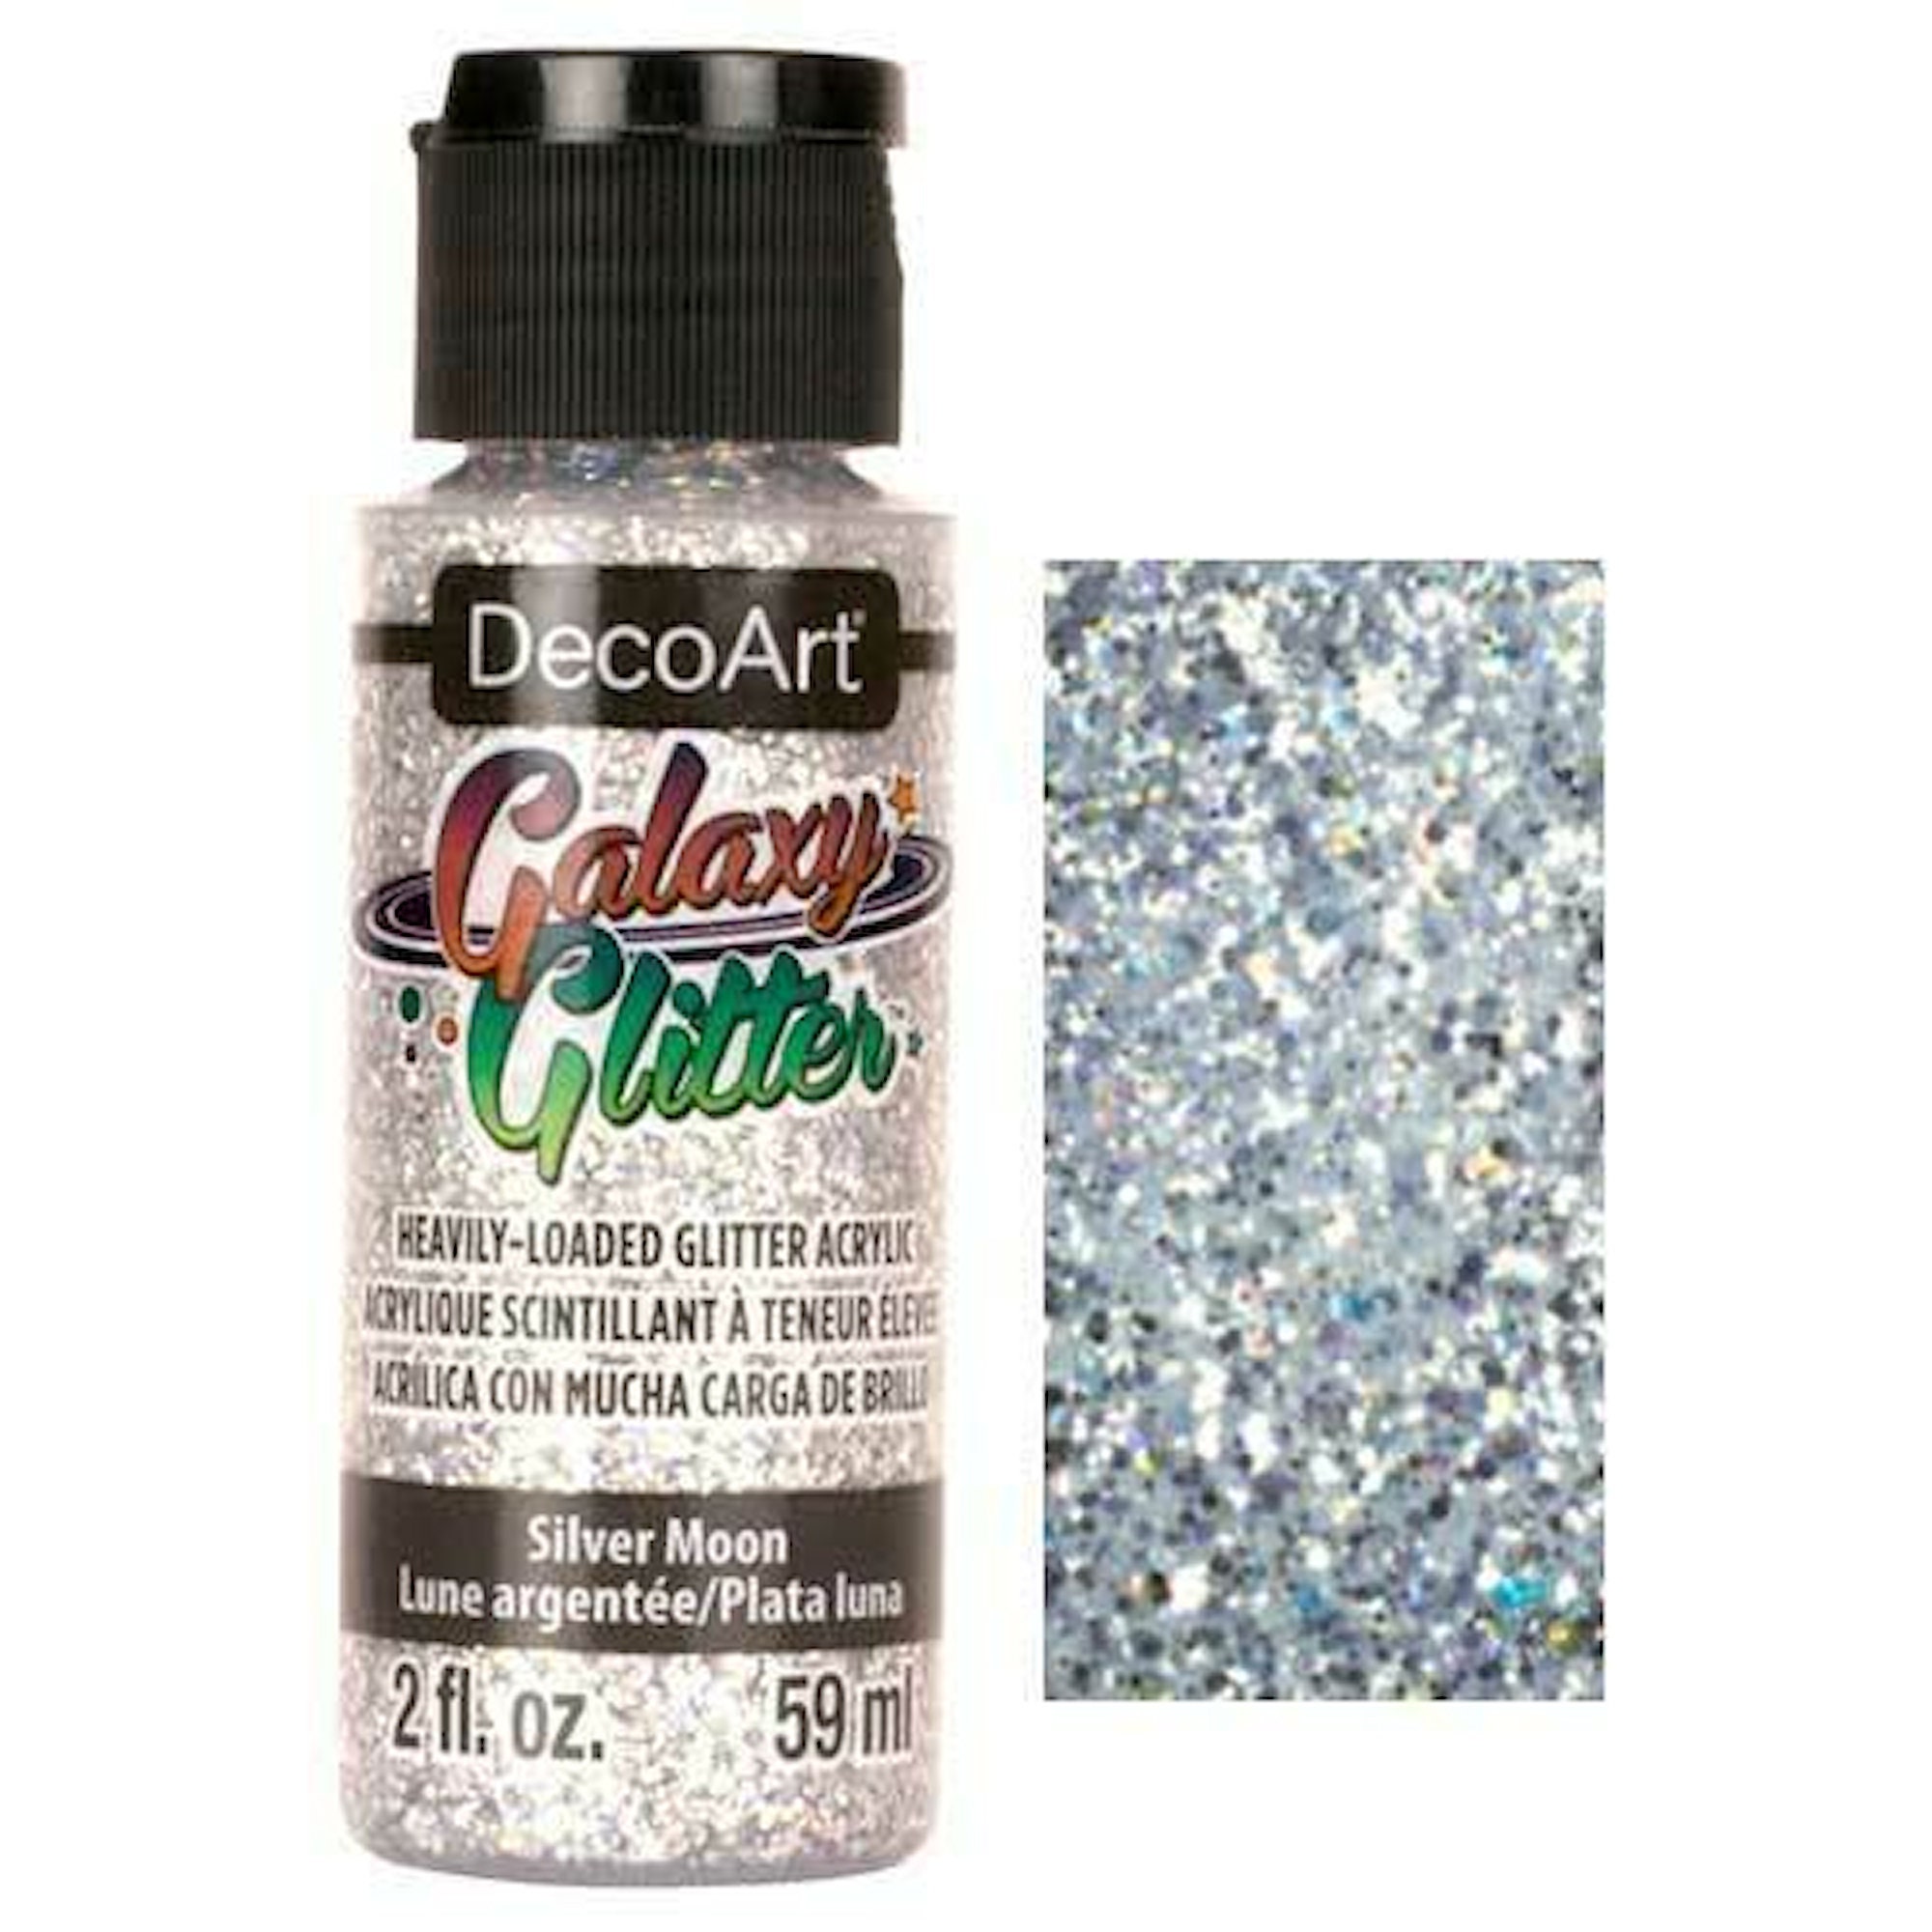 59ml Galaxy Glitter Acrylic, Clear Ice Comet, Decoart, Paint on Acrylic,  Water Based, Premium Glitter, 10 Colors Available, UK Shop 